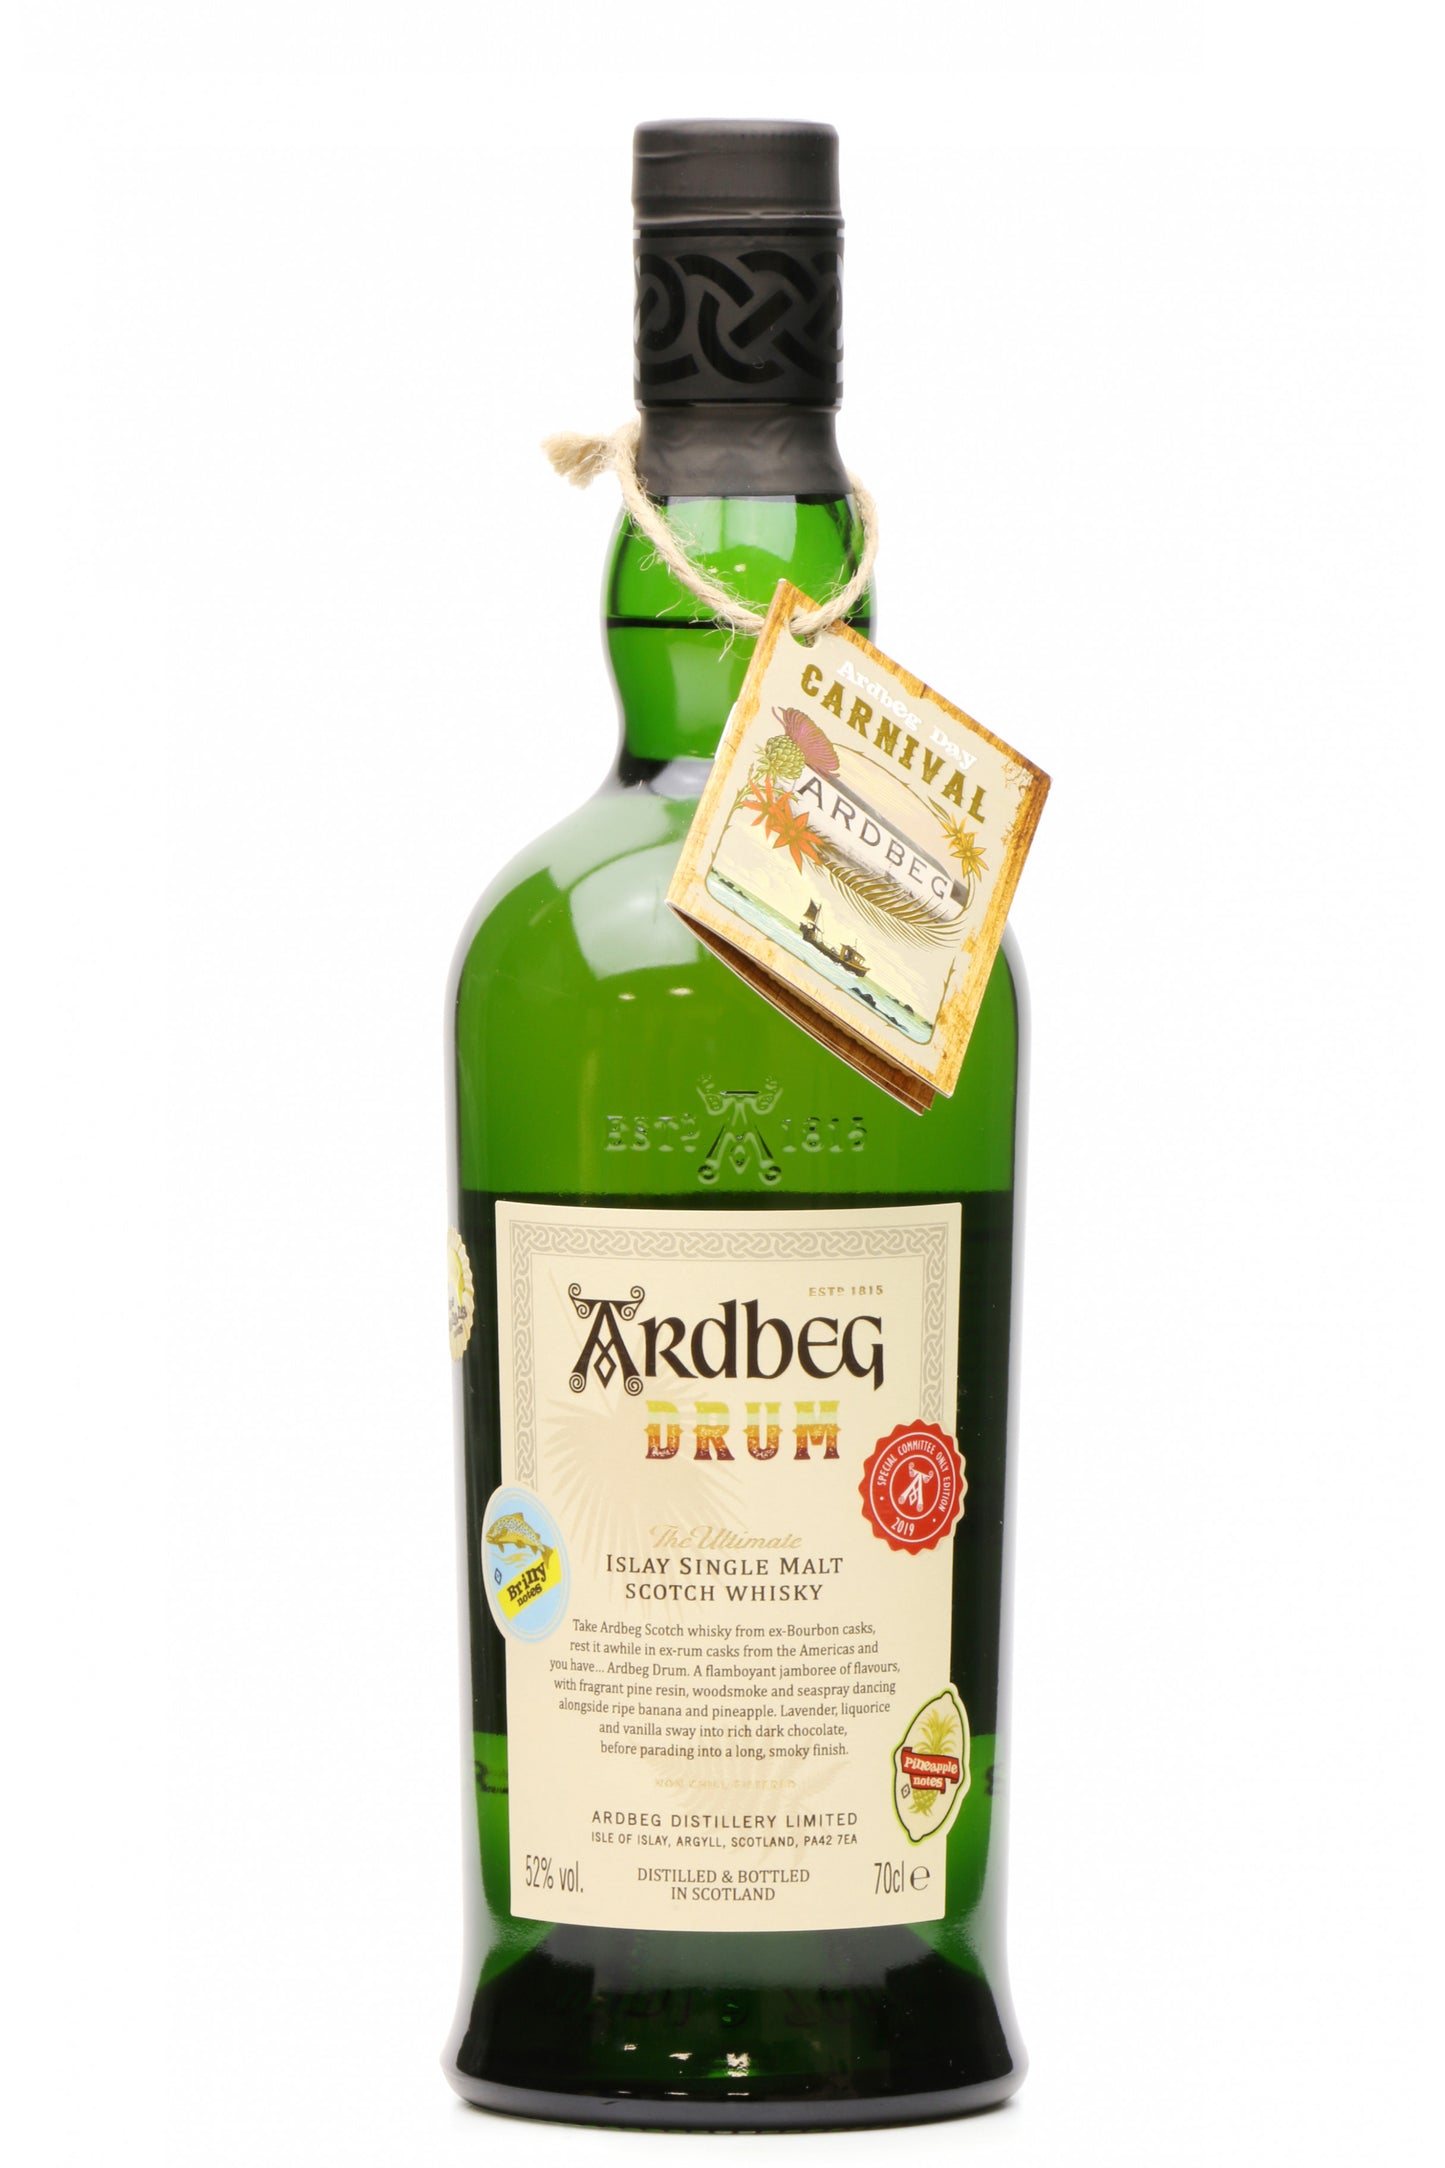 ARDBEG DRUM - SPECIAL COMMITTEE ONLY EDITION 2019